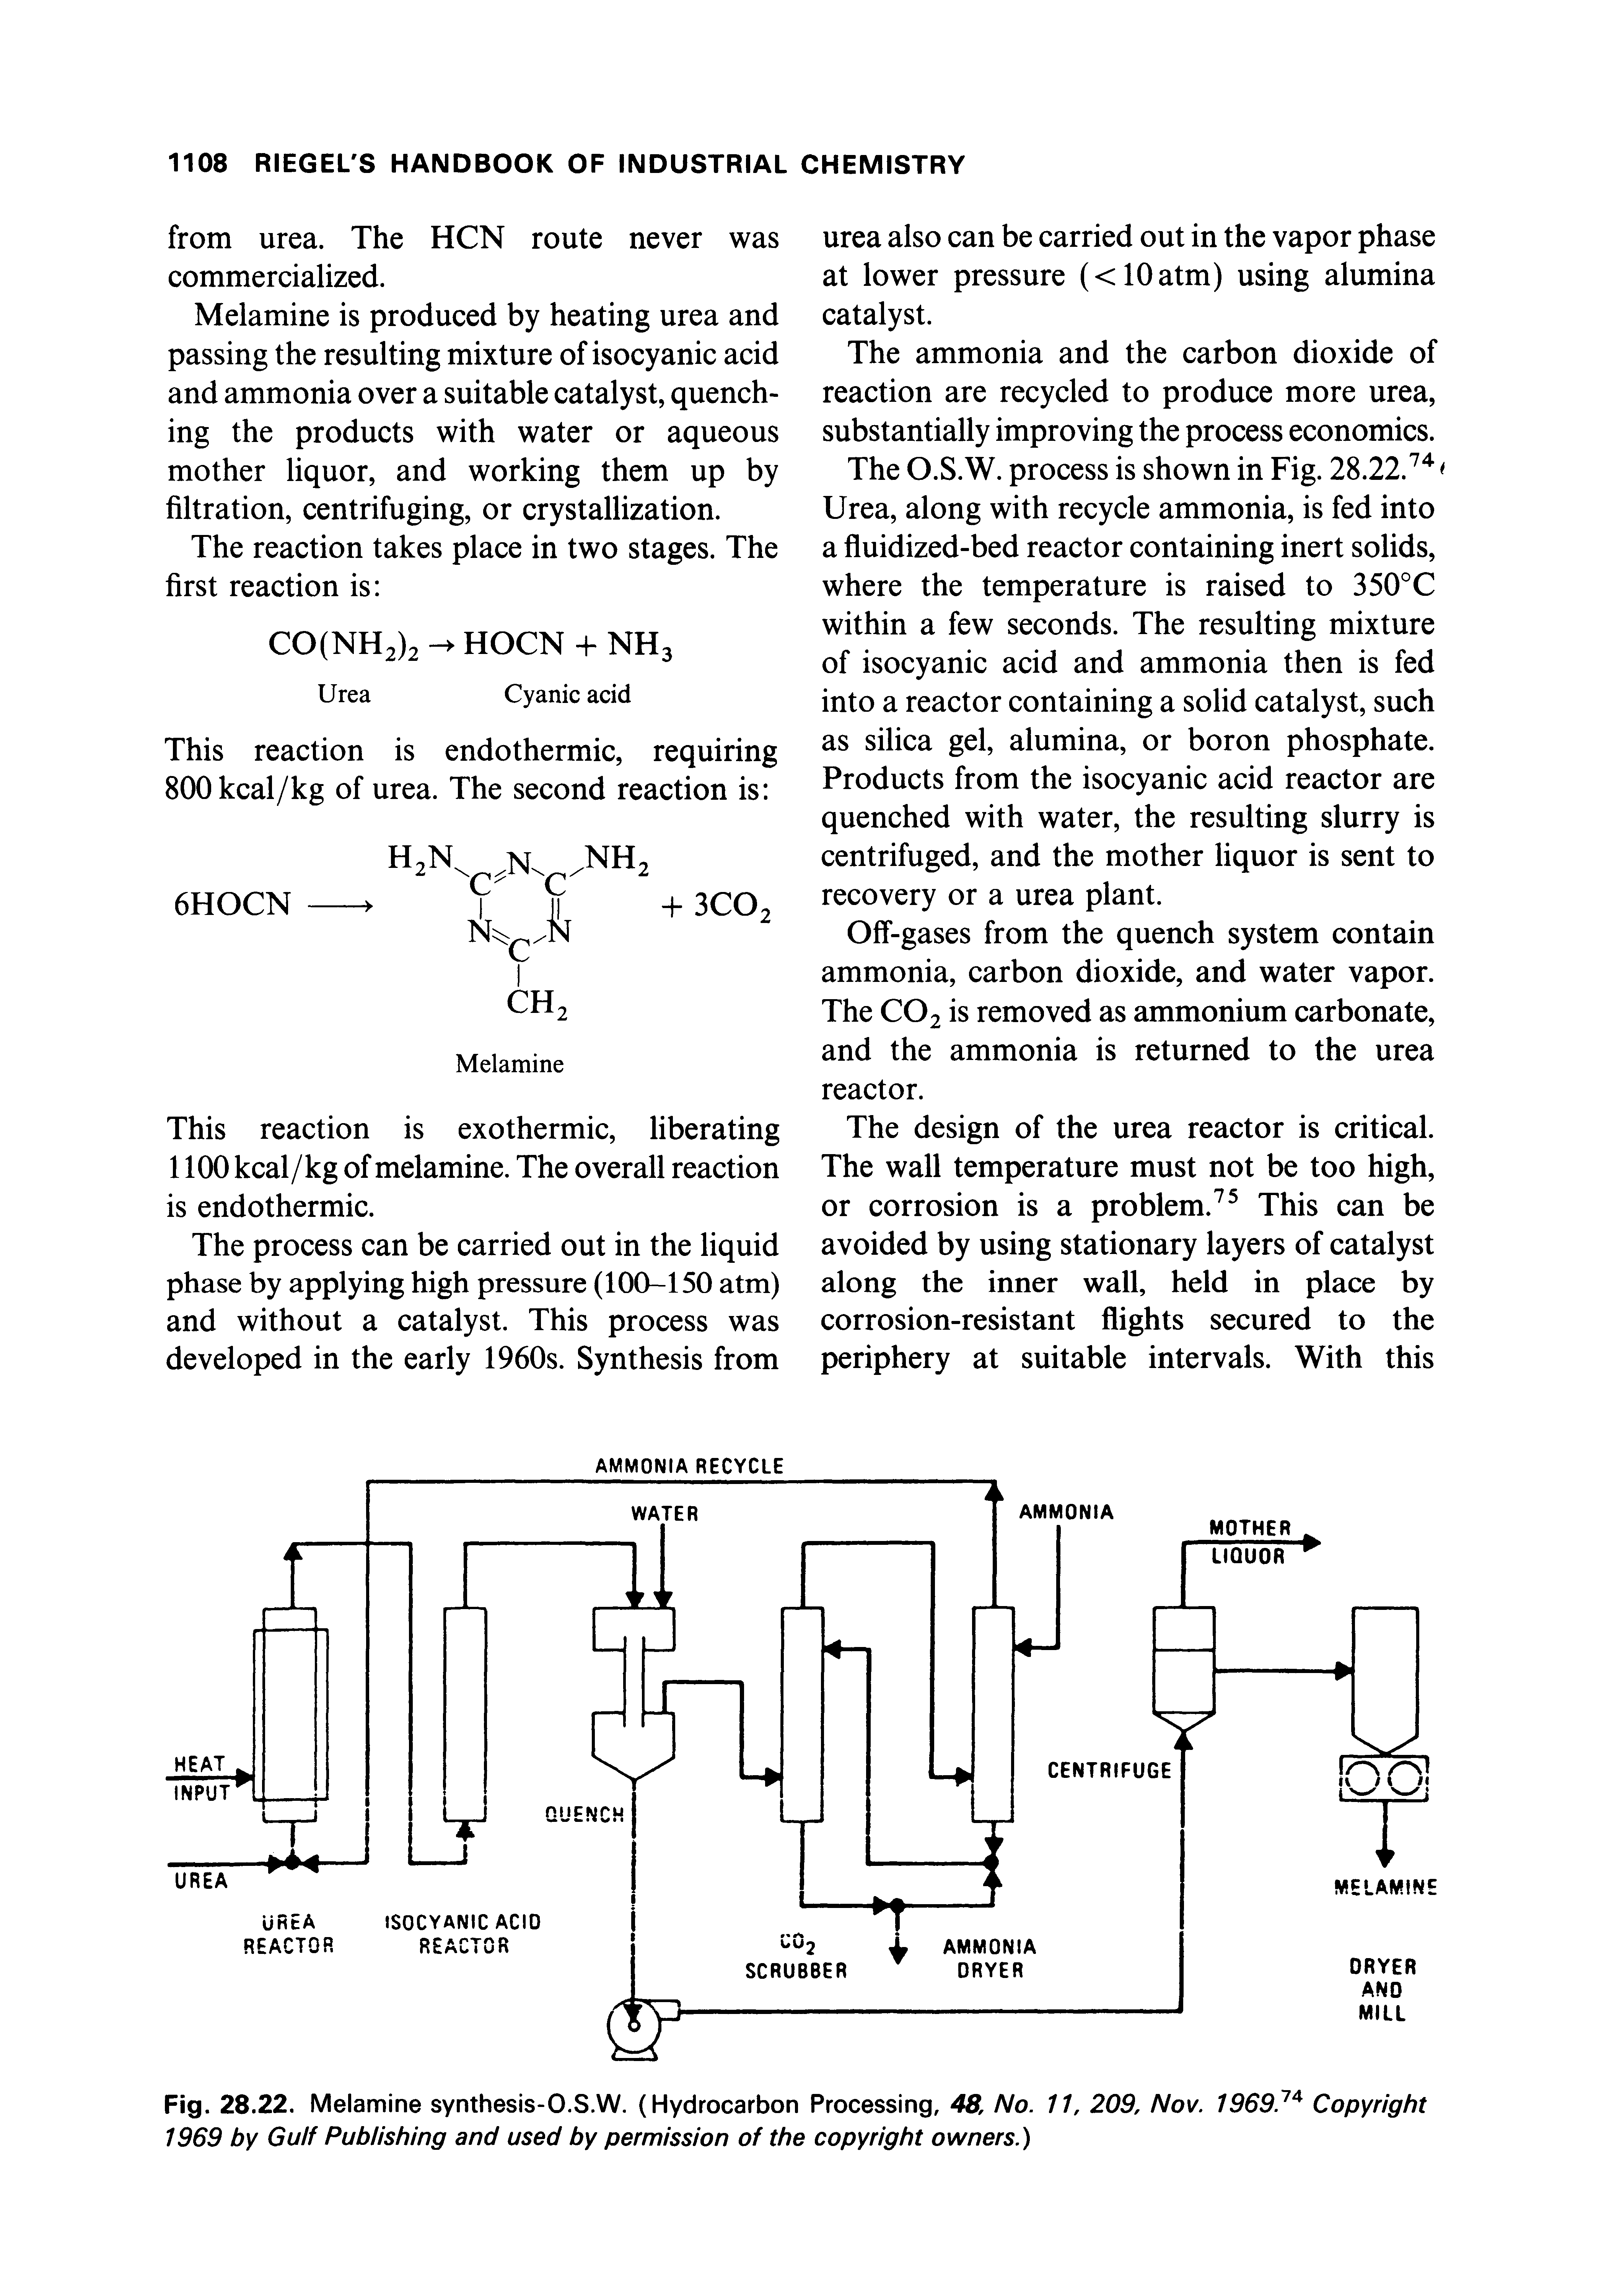 Fig. 28.22. Melamine synthesis-0.S.W. (Hydrocarbon Processing, 48, No. 11, 209, Nov. 1969. Copyright 1969 by Gulf Publishing and used by permission of the copyright owners.)...